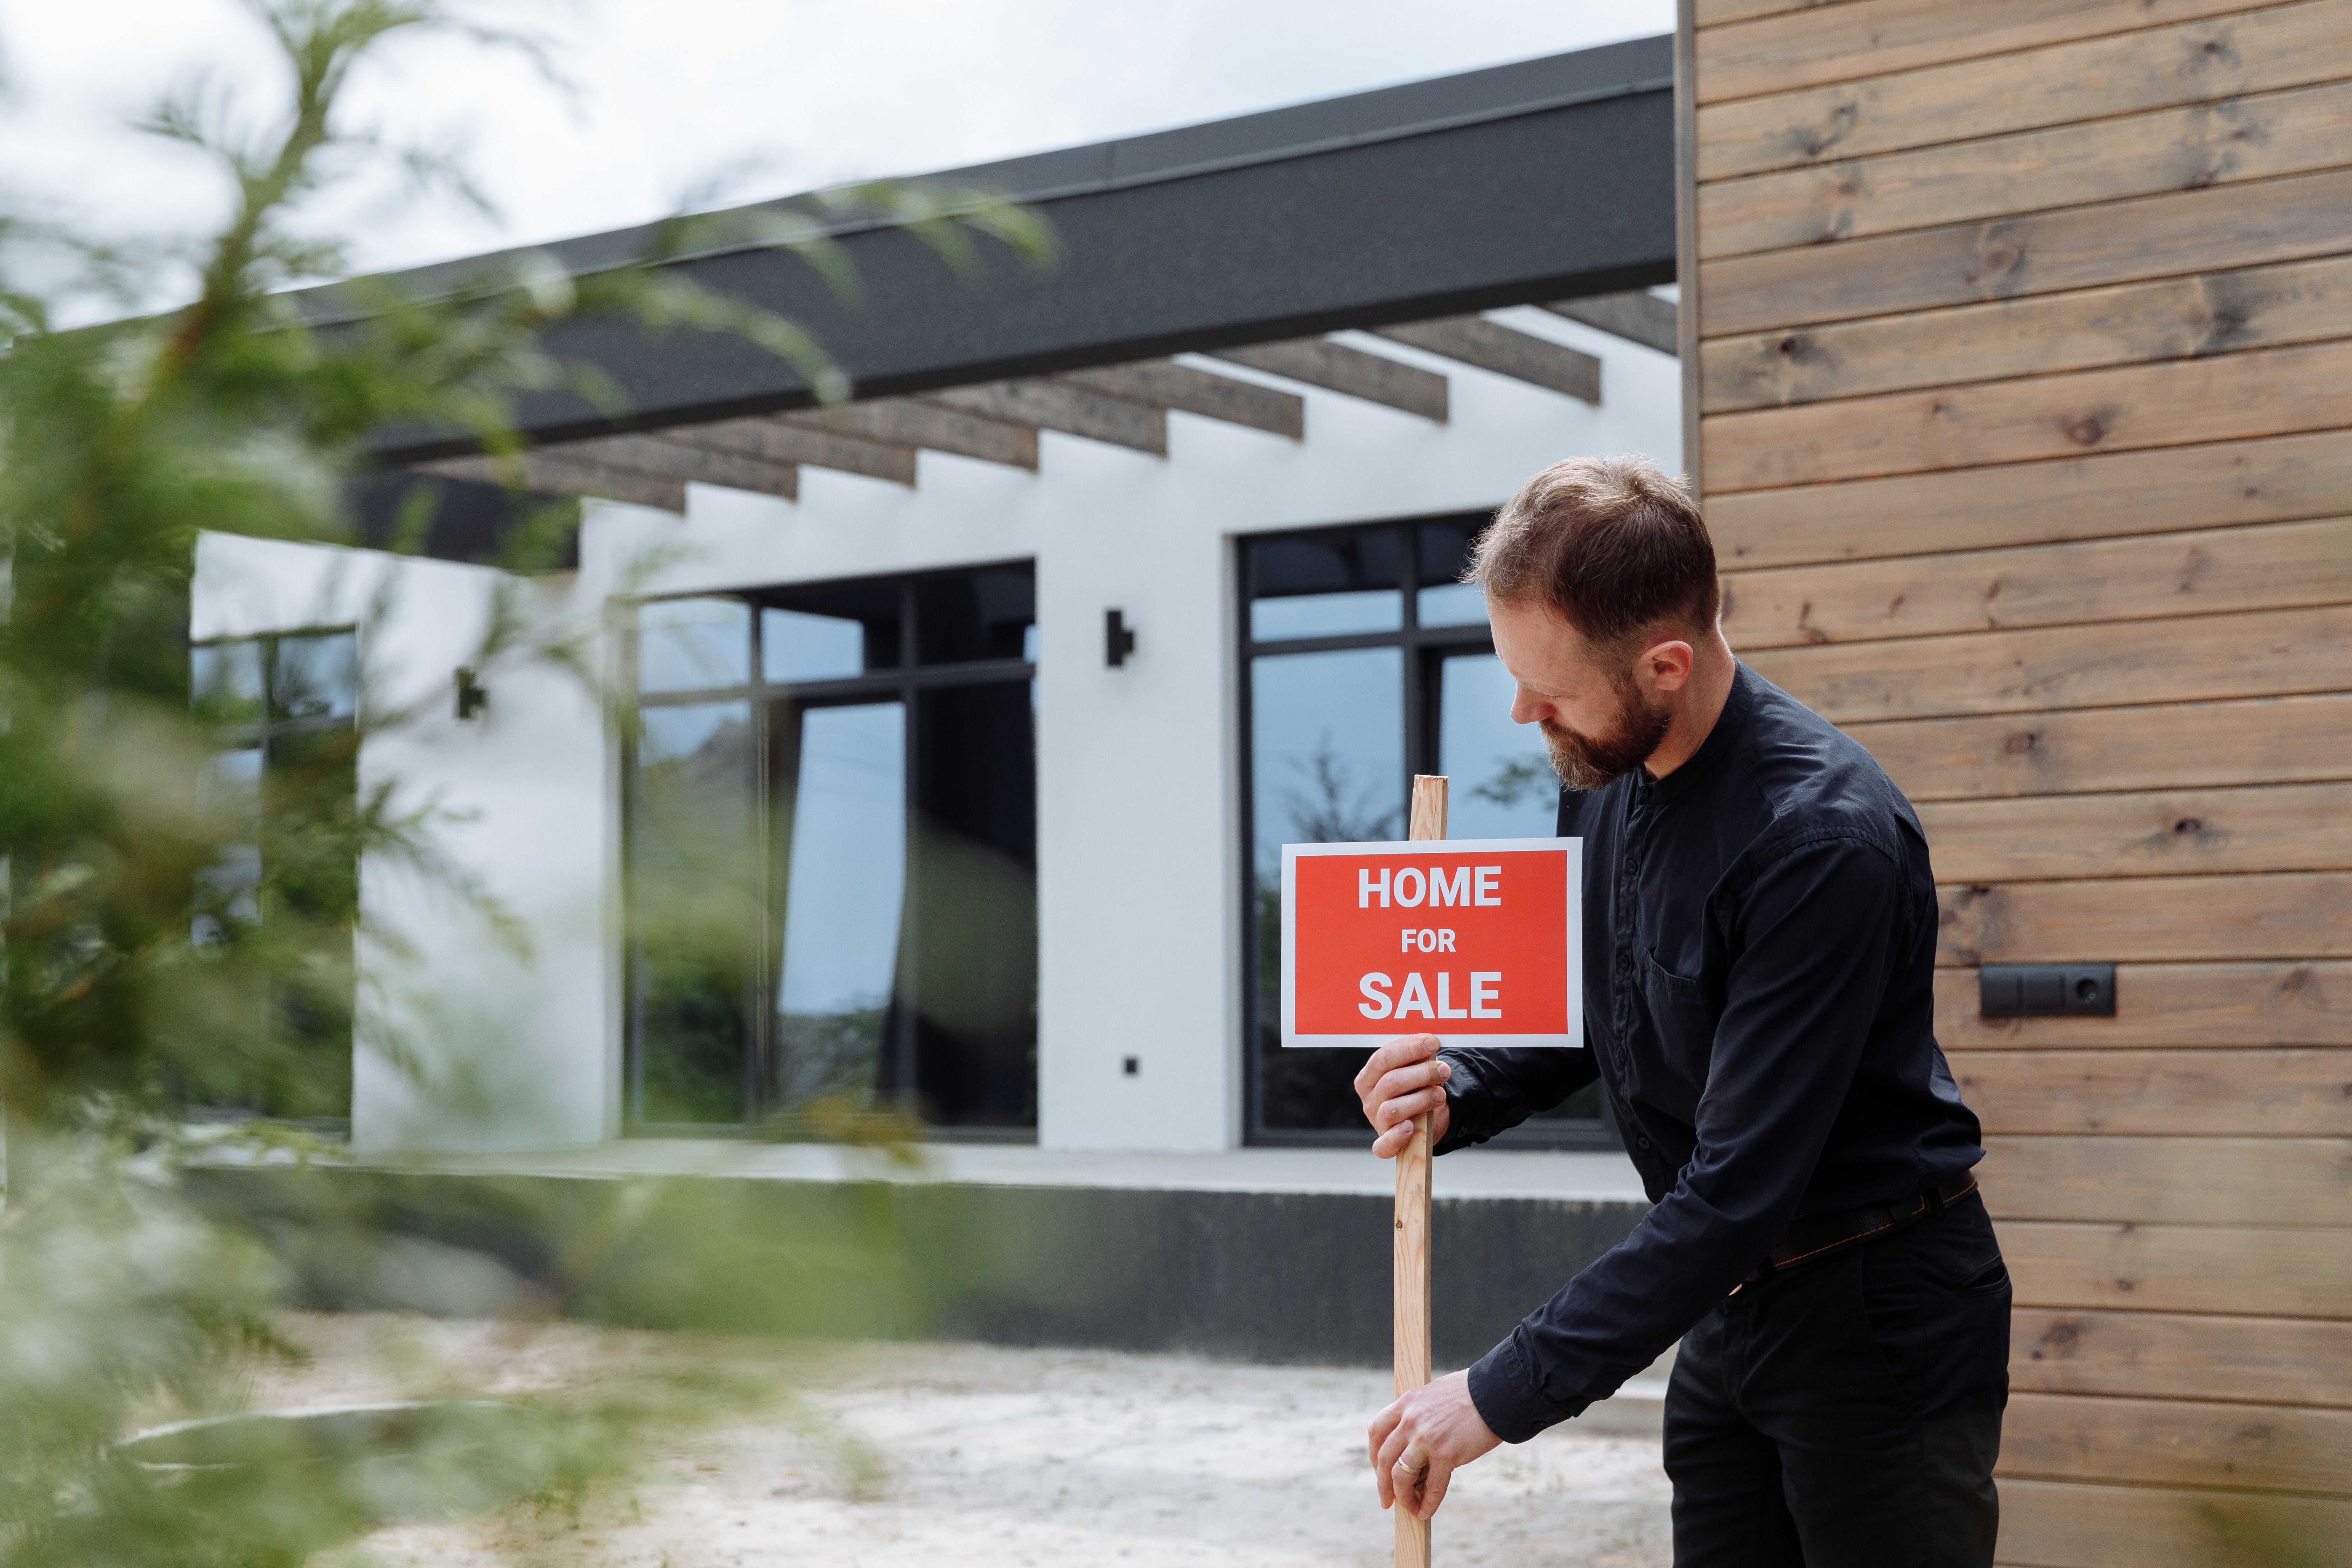 Estate agent installs home for sale sign outdoors